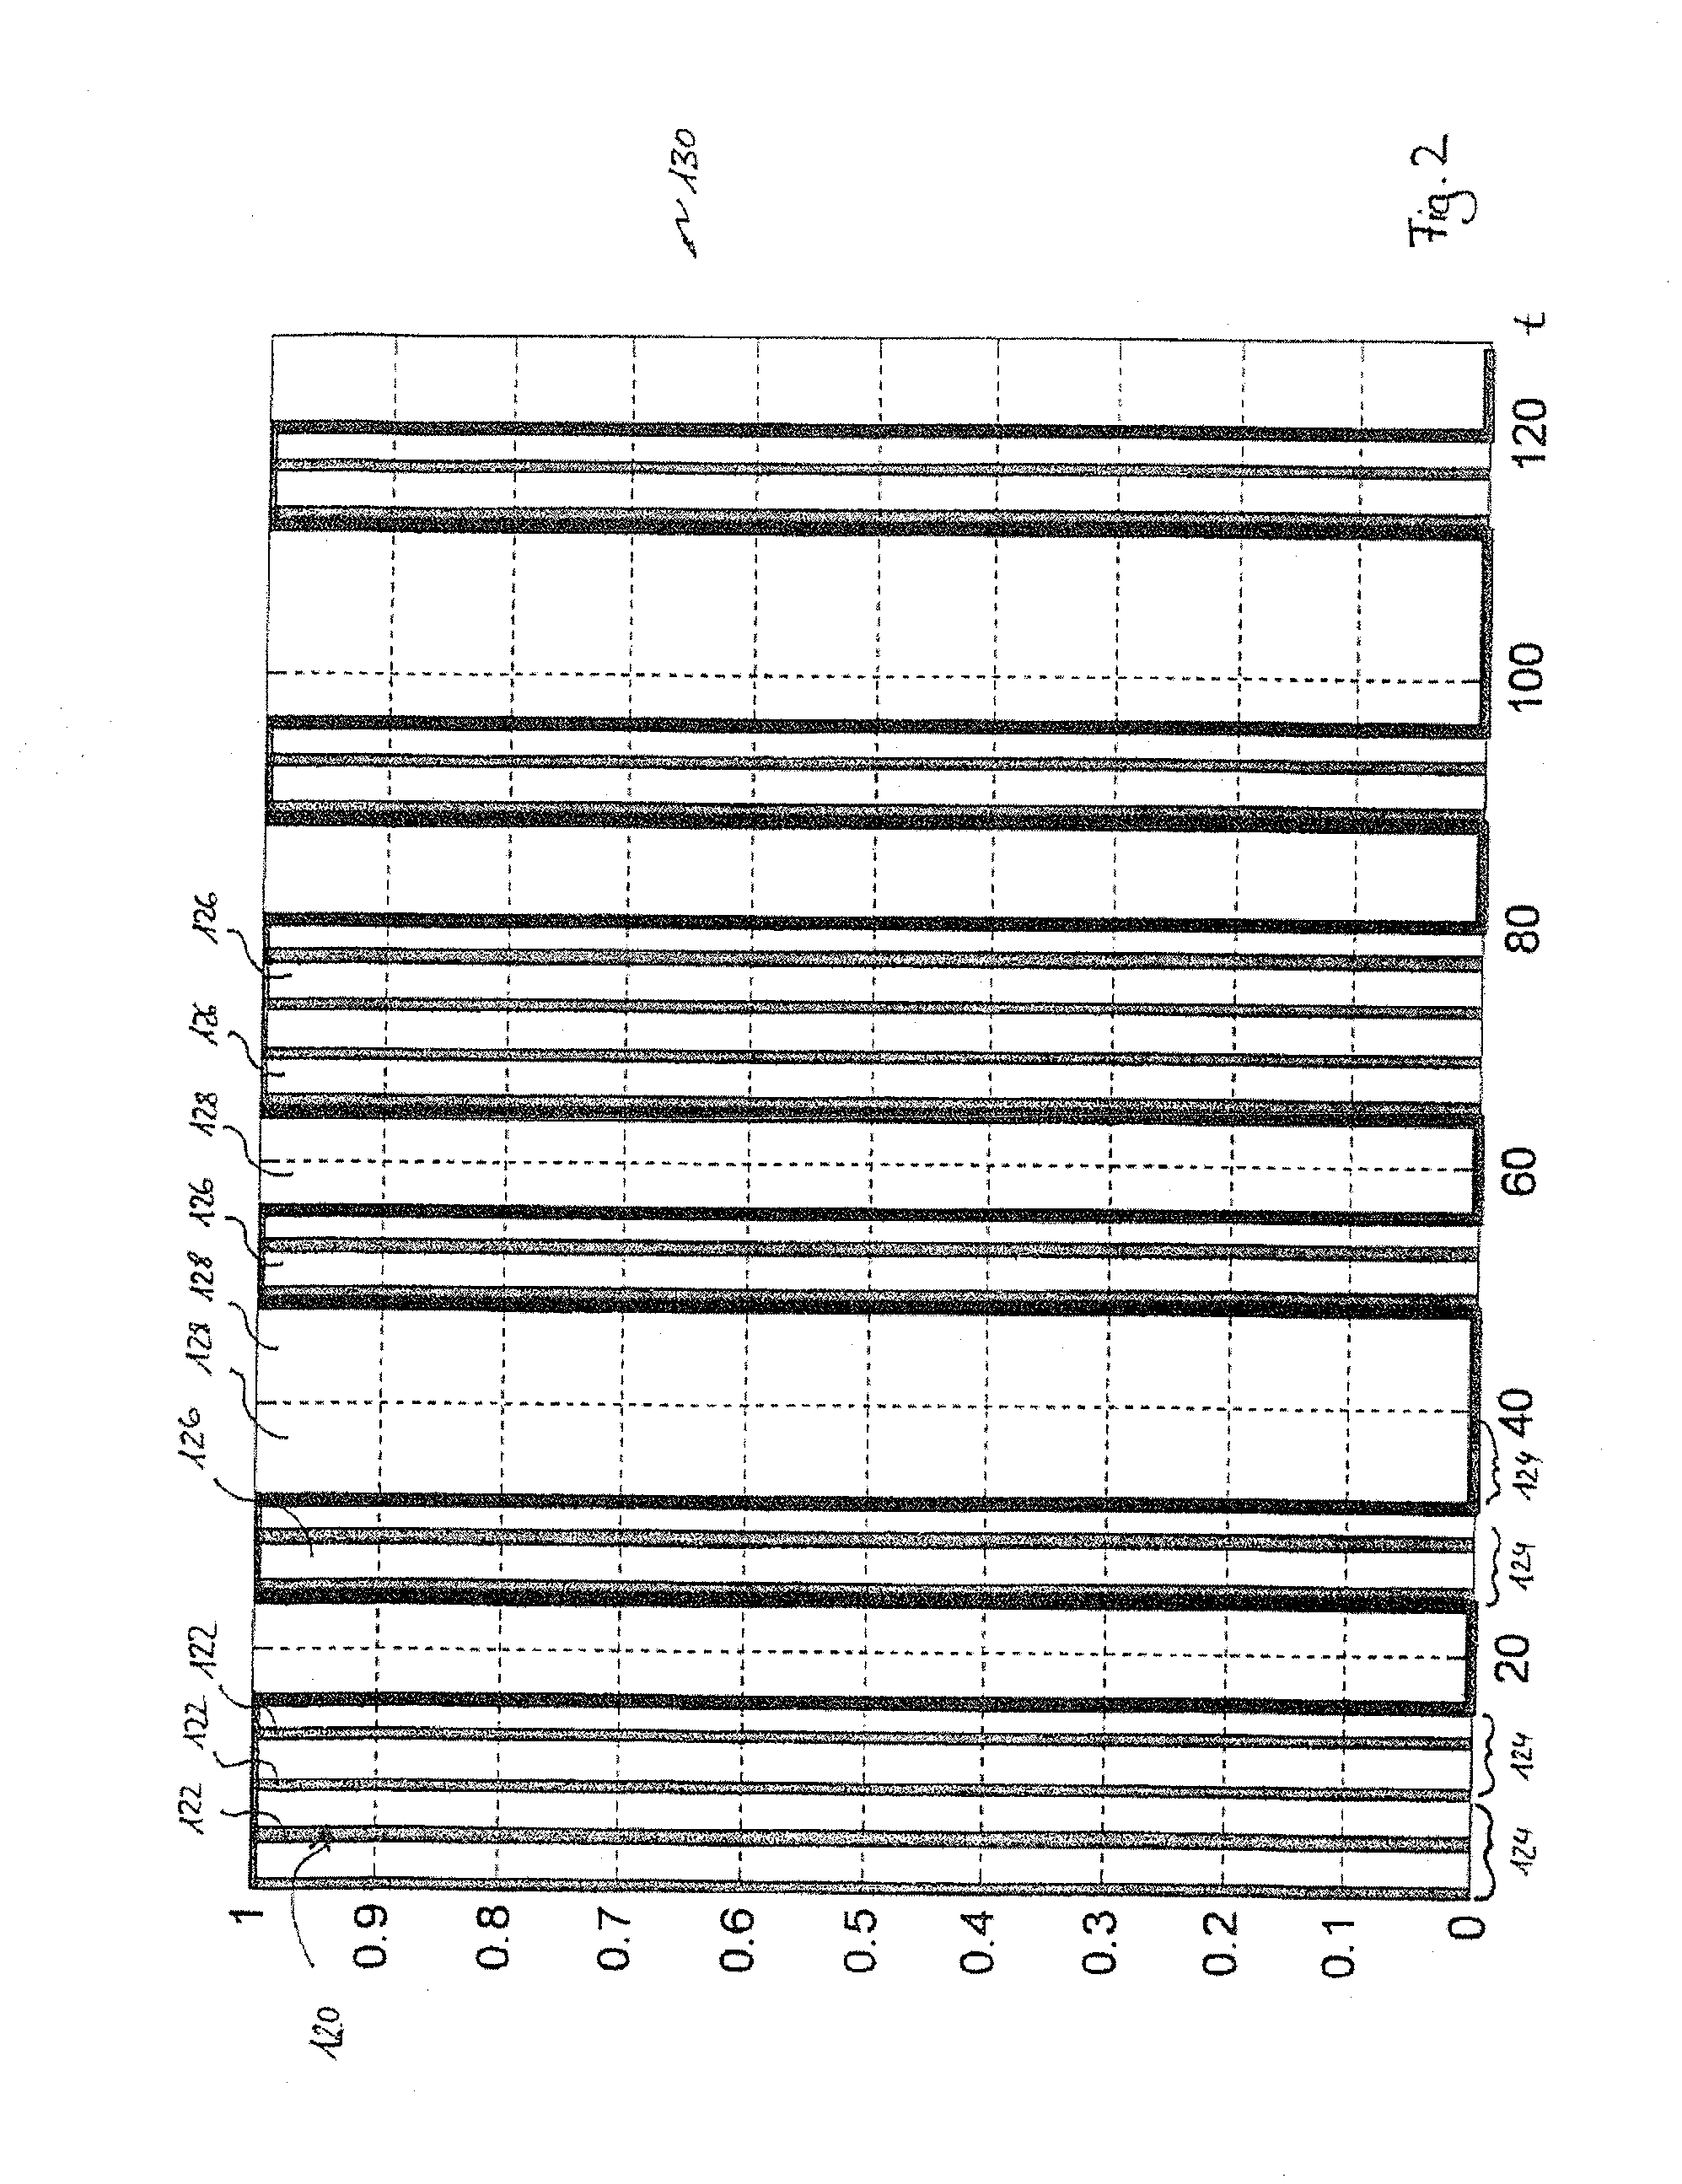 Ionization Method, Ion Producing Device and Uses of the Same in Ion Mobility Spectrometry